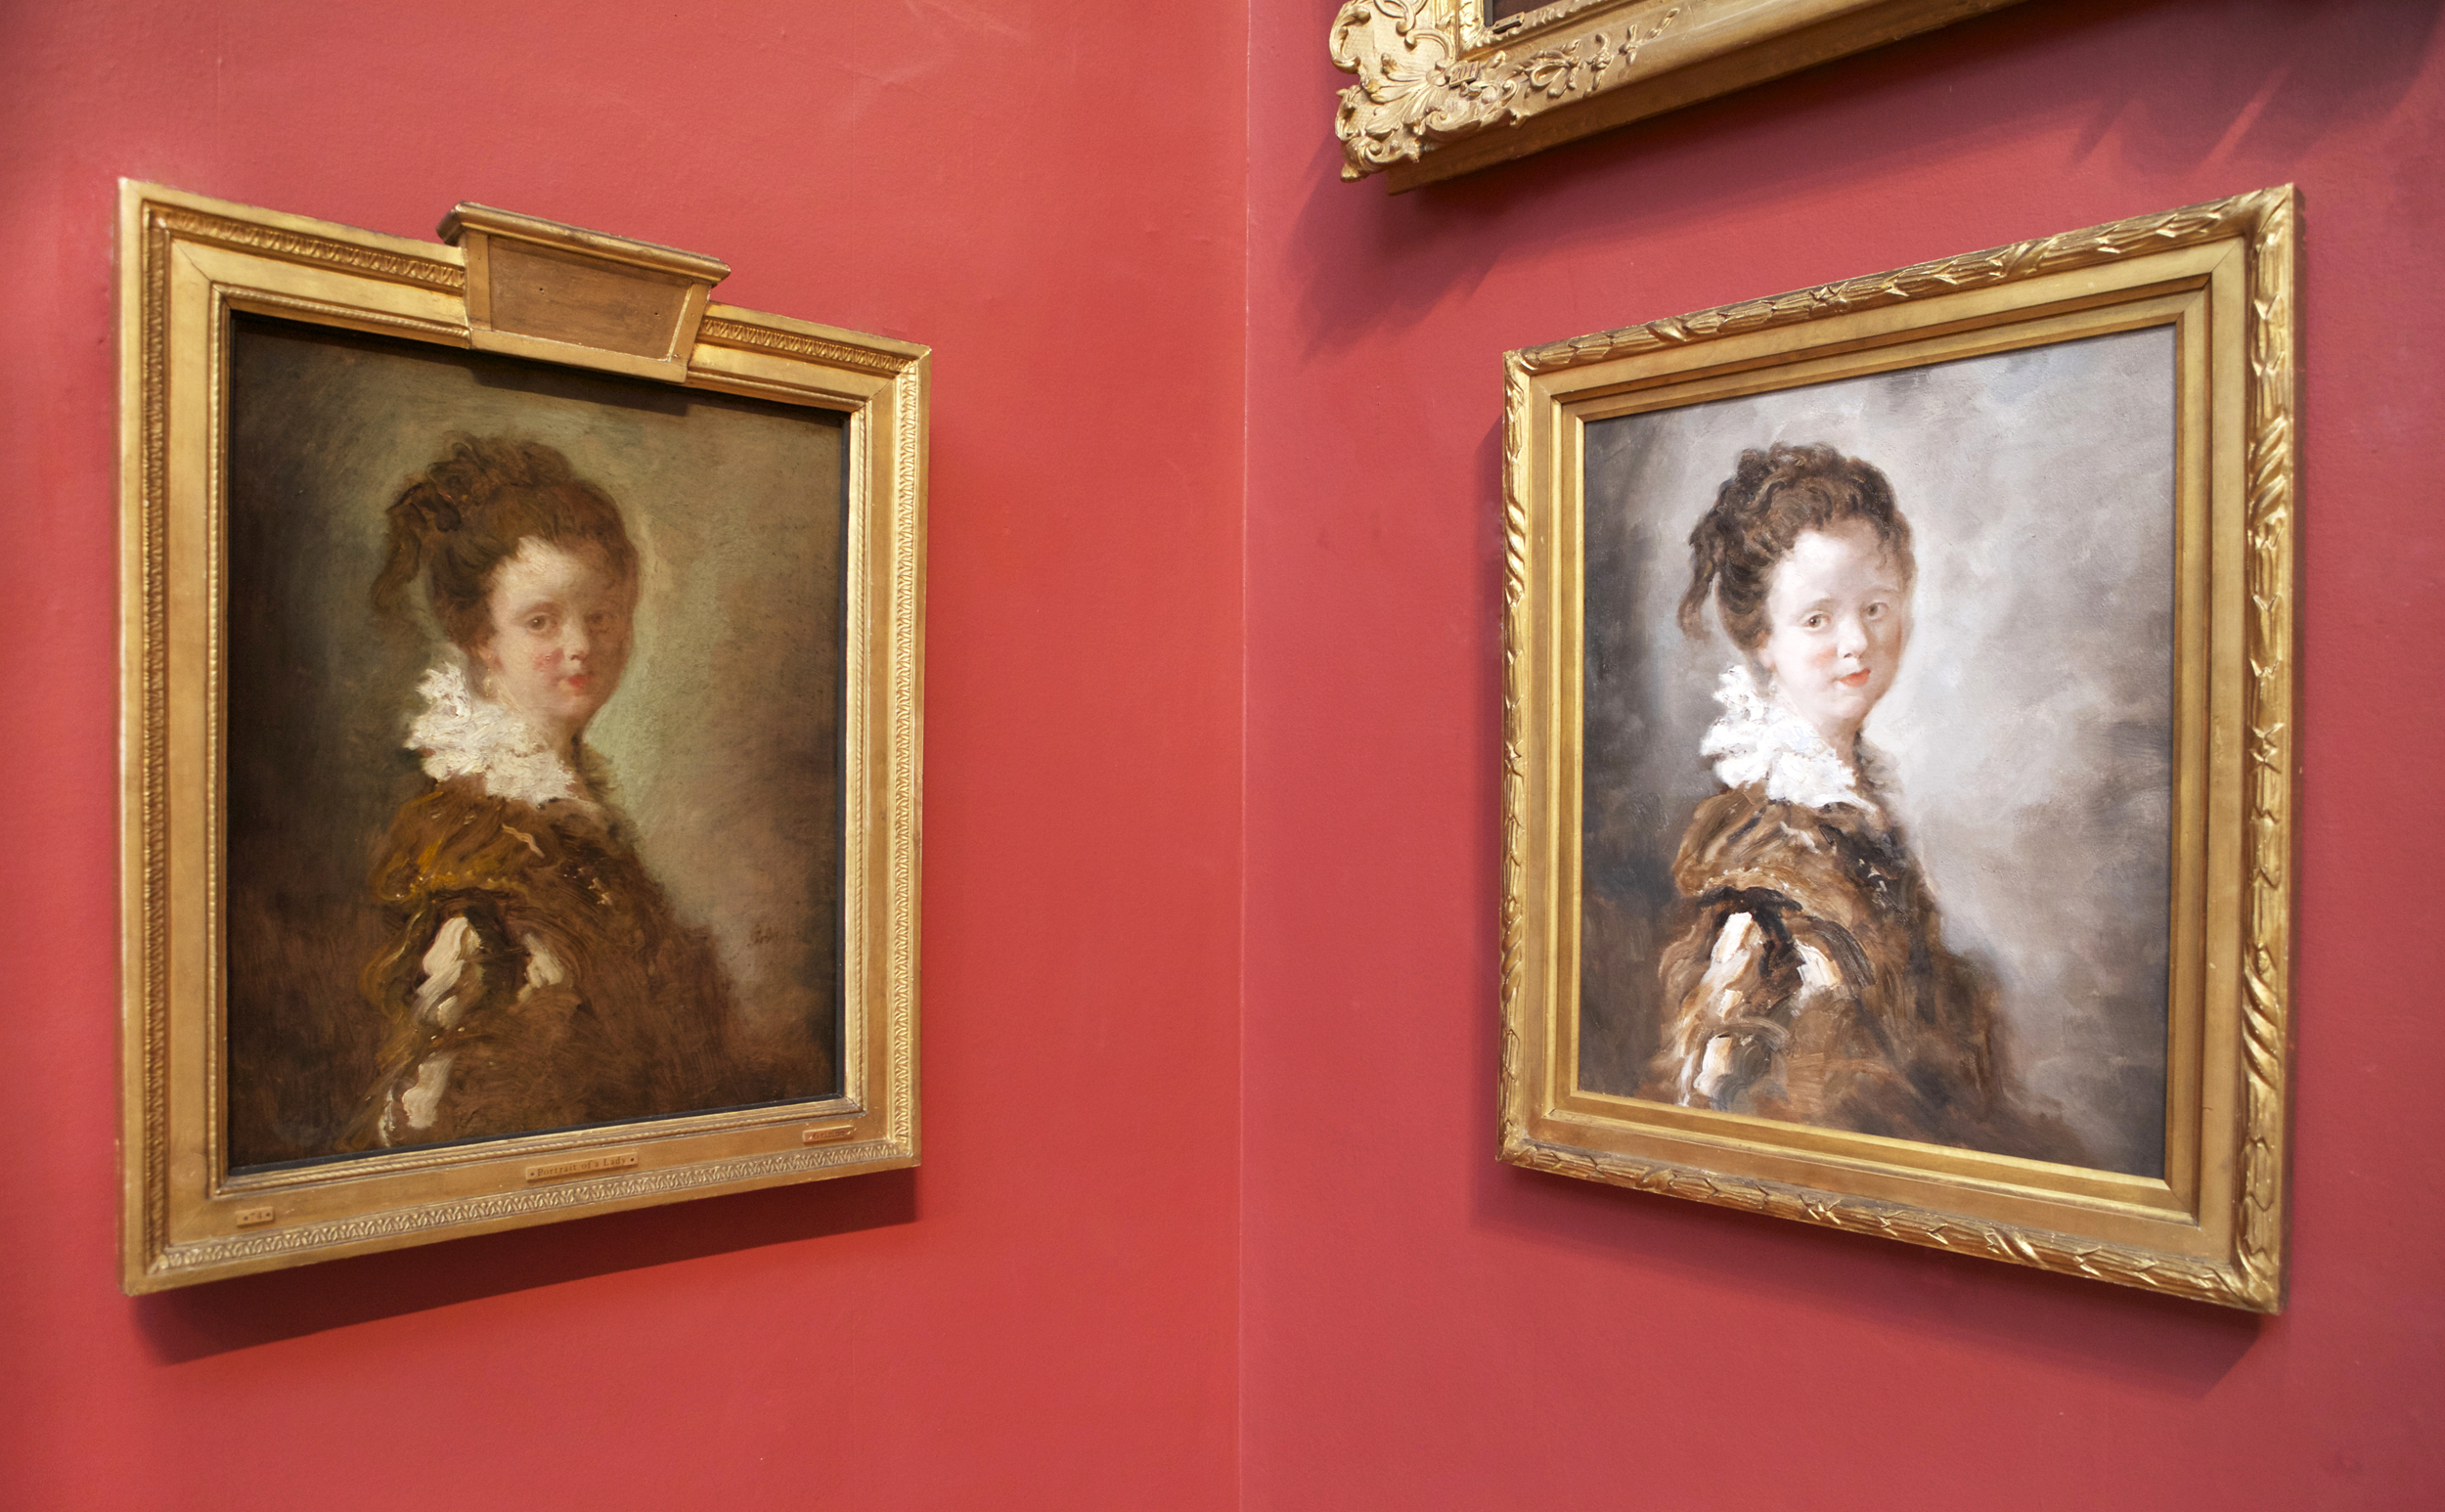 The differences between the authentic Fragonard (left) and the 'Made in China' replica are readily apparent when hung side by side. Dulwich Picture Gallery image